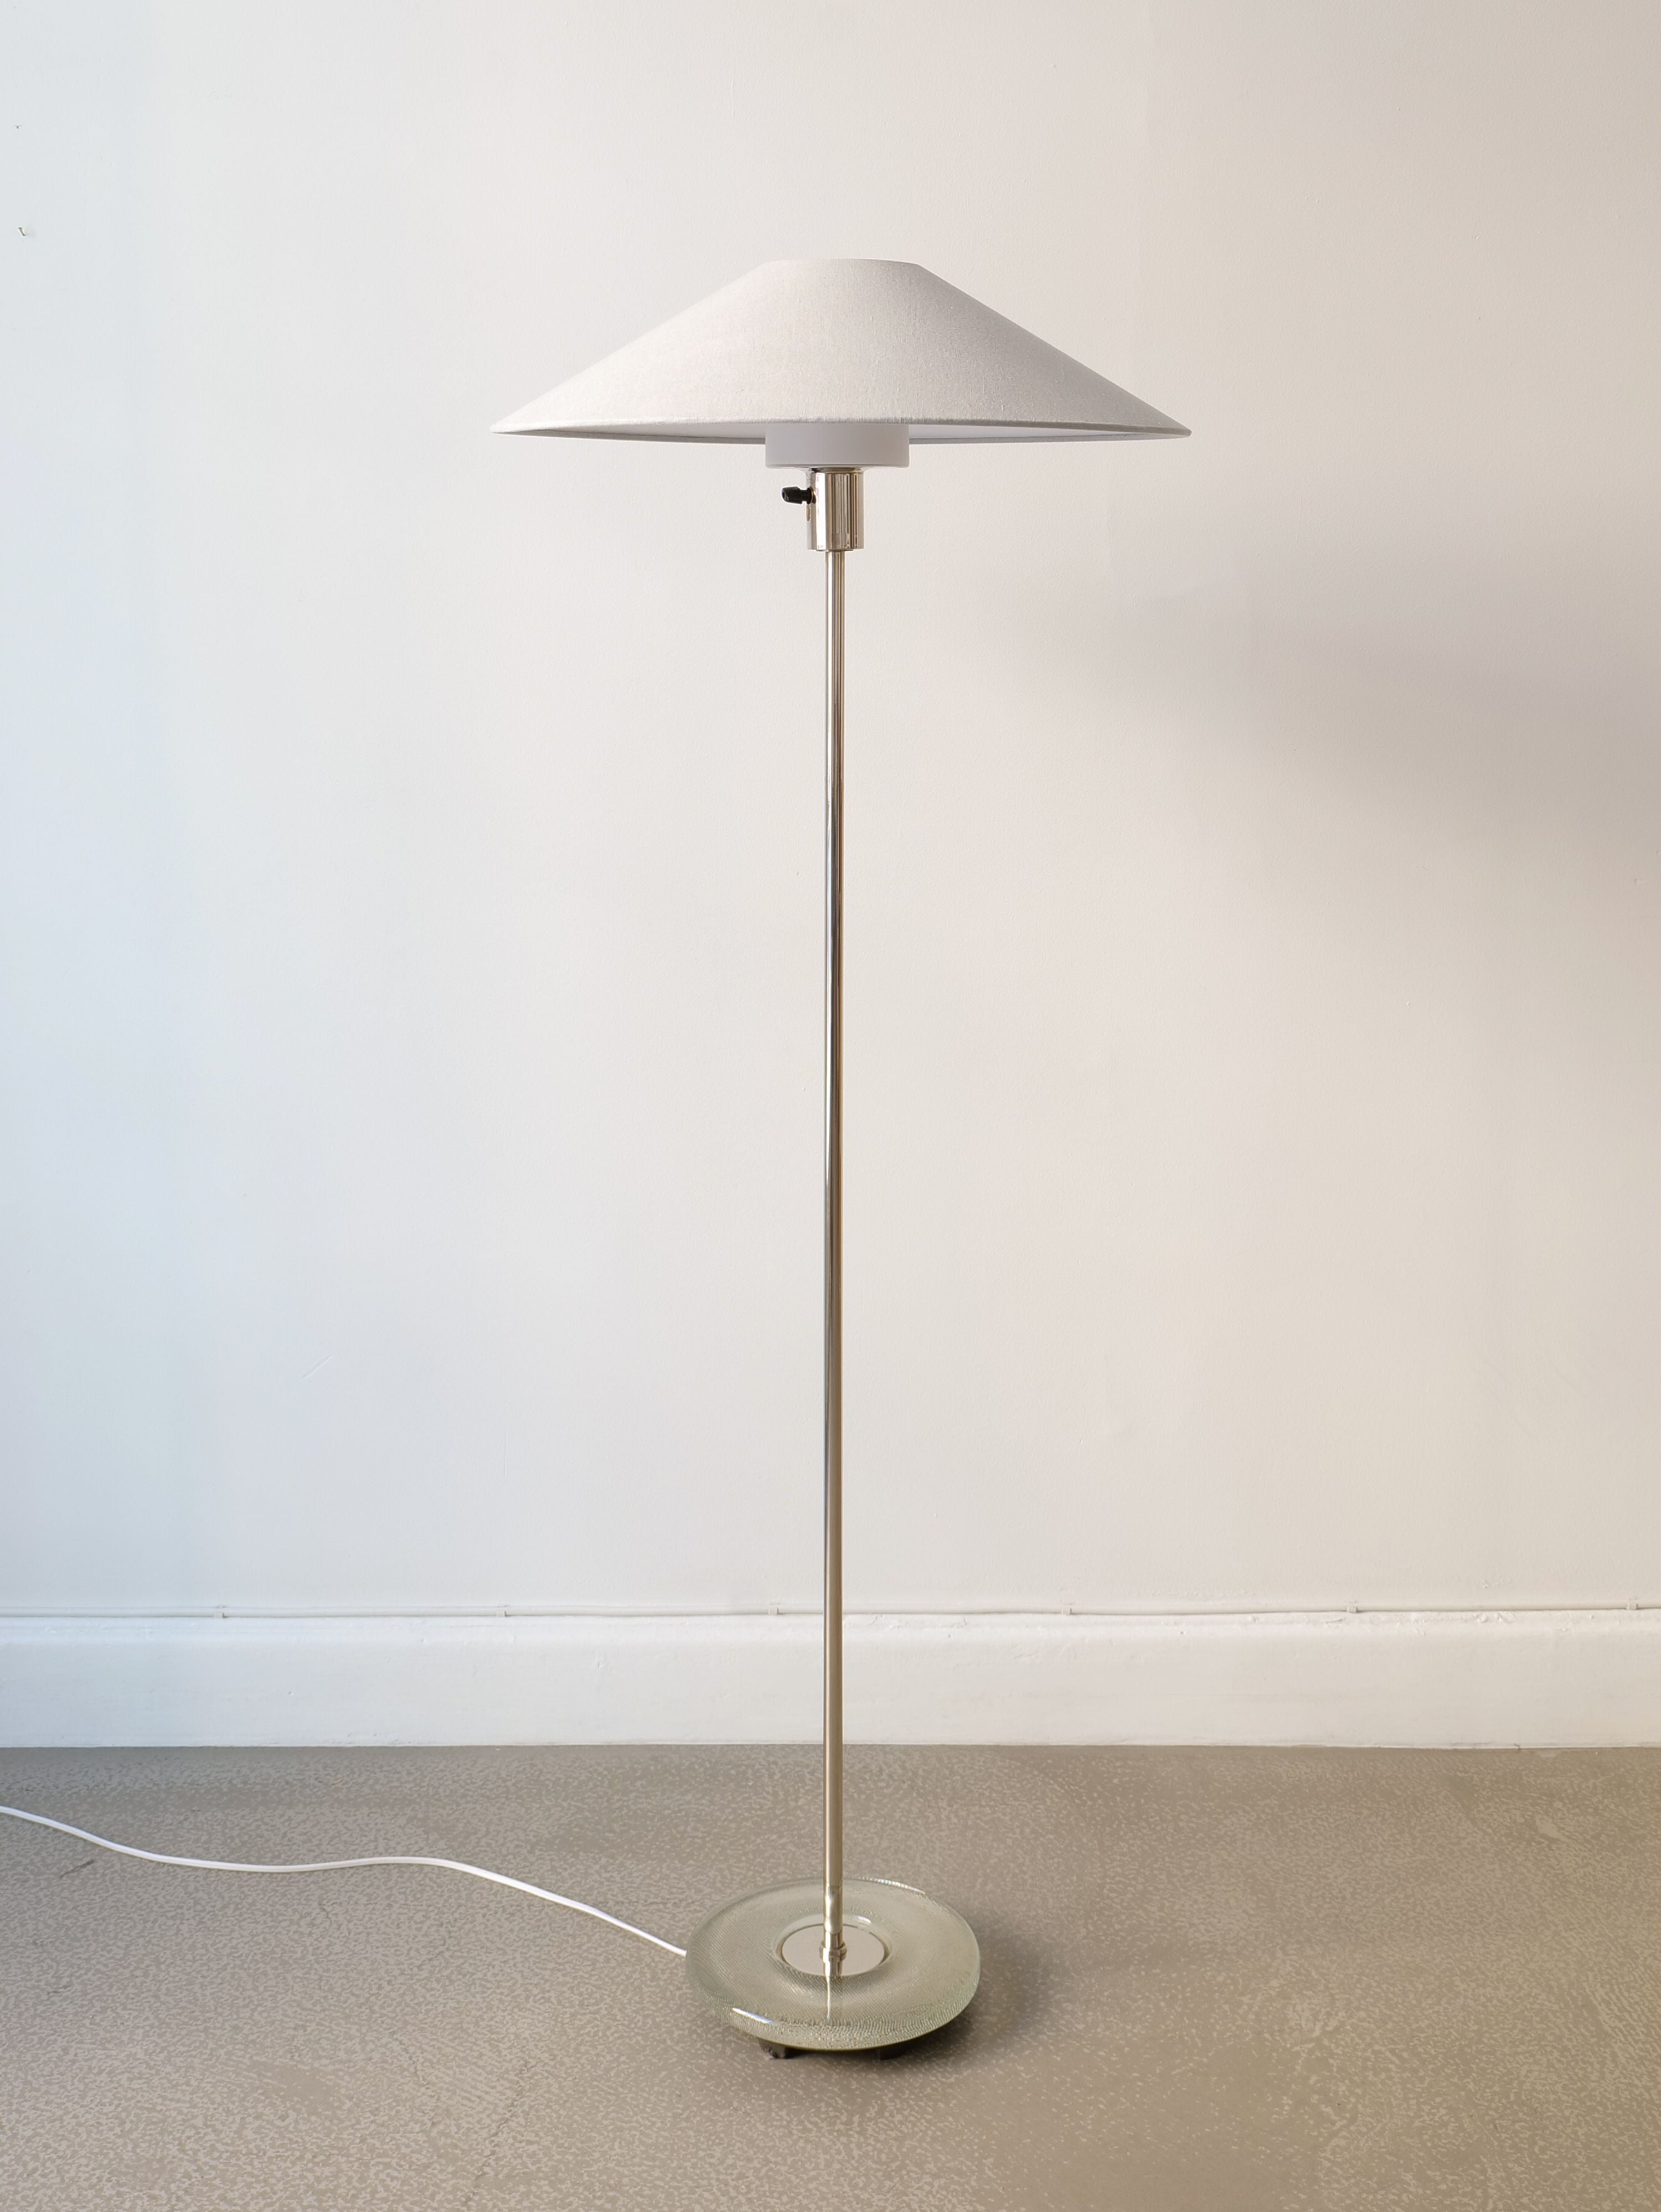 A sleek, modern floor lamp with a slim metallic stand and a cone-shaped white lampshade embodies the Swedish Modern design. This Deco Floor Lamp Harald Notini 1940s by Collection apart stands on a beige floor against a plain white wall, with a visible white power cord trailing from the base.